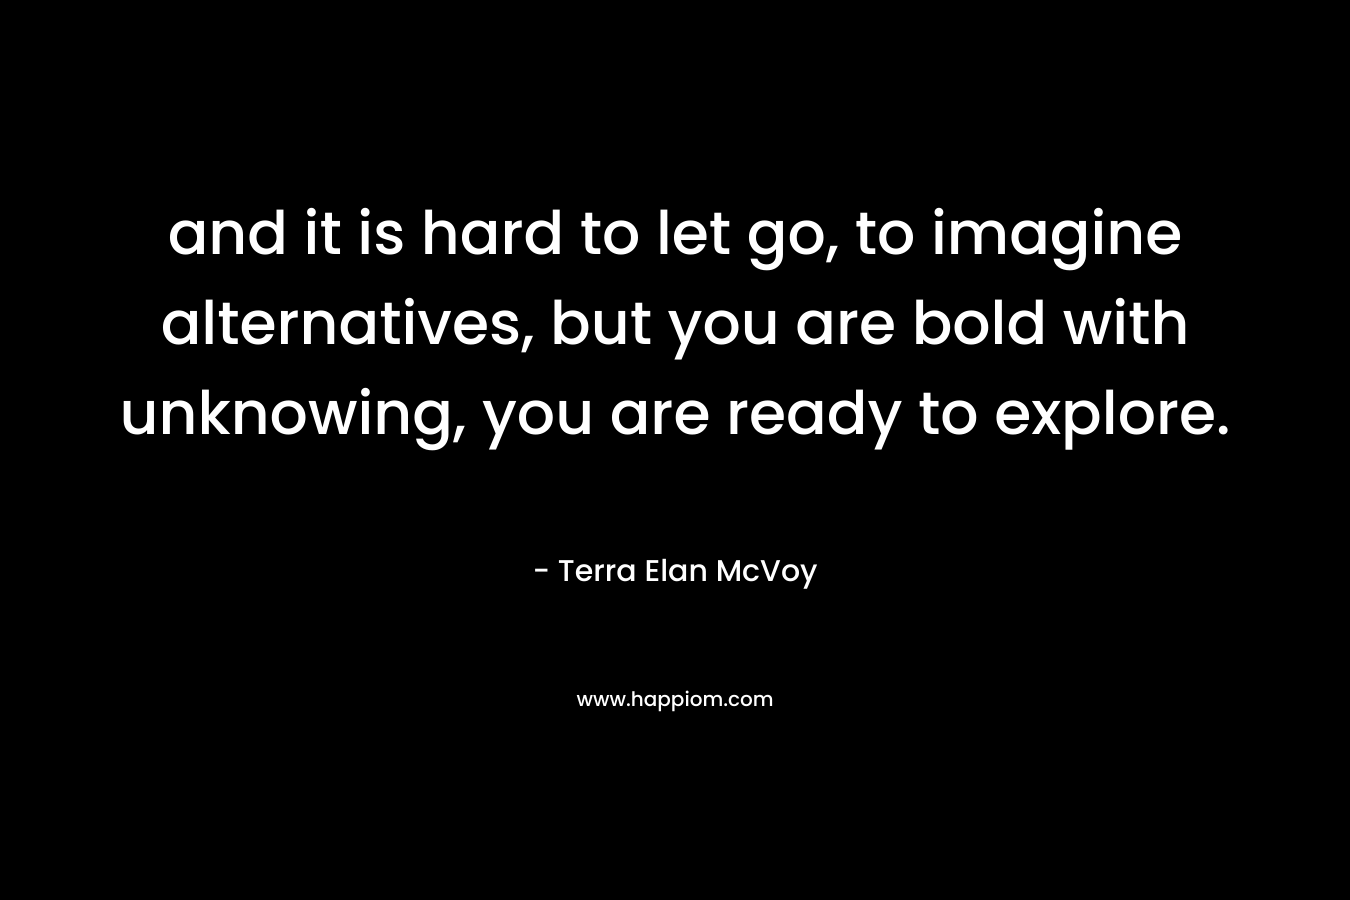 and it is hard to let go, to imagine alternatives, but you are bold with unknowing, you are ready to explore.